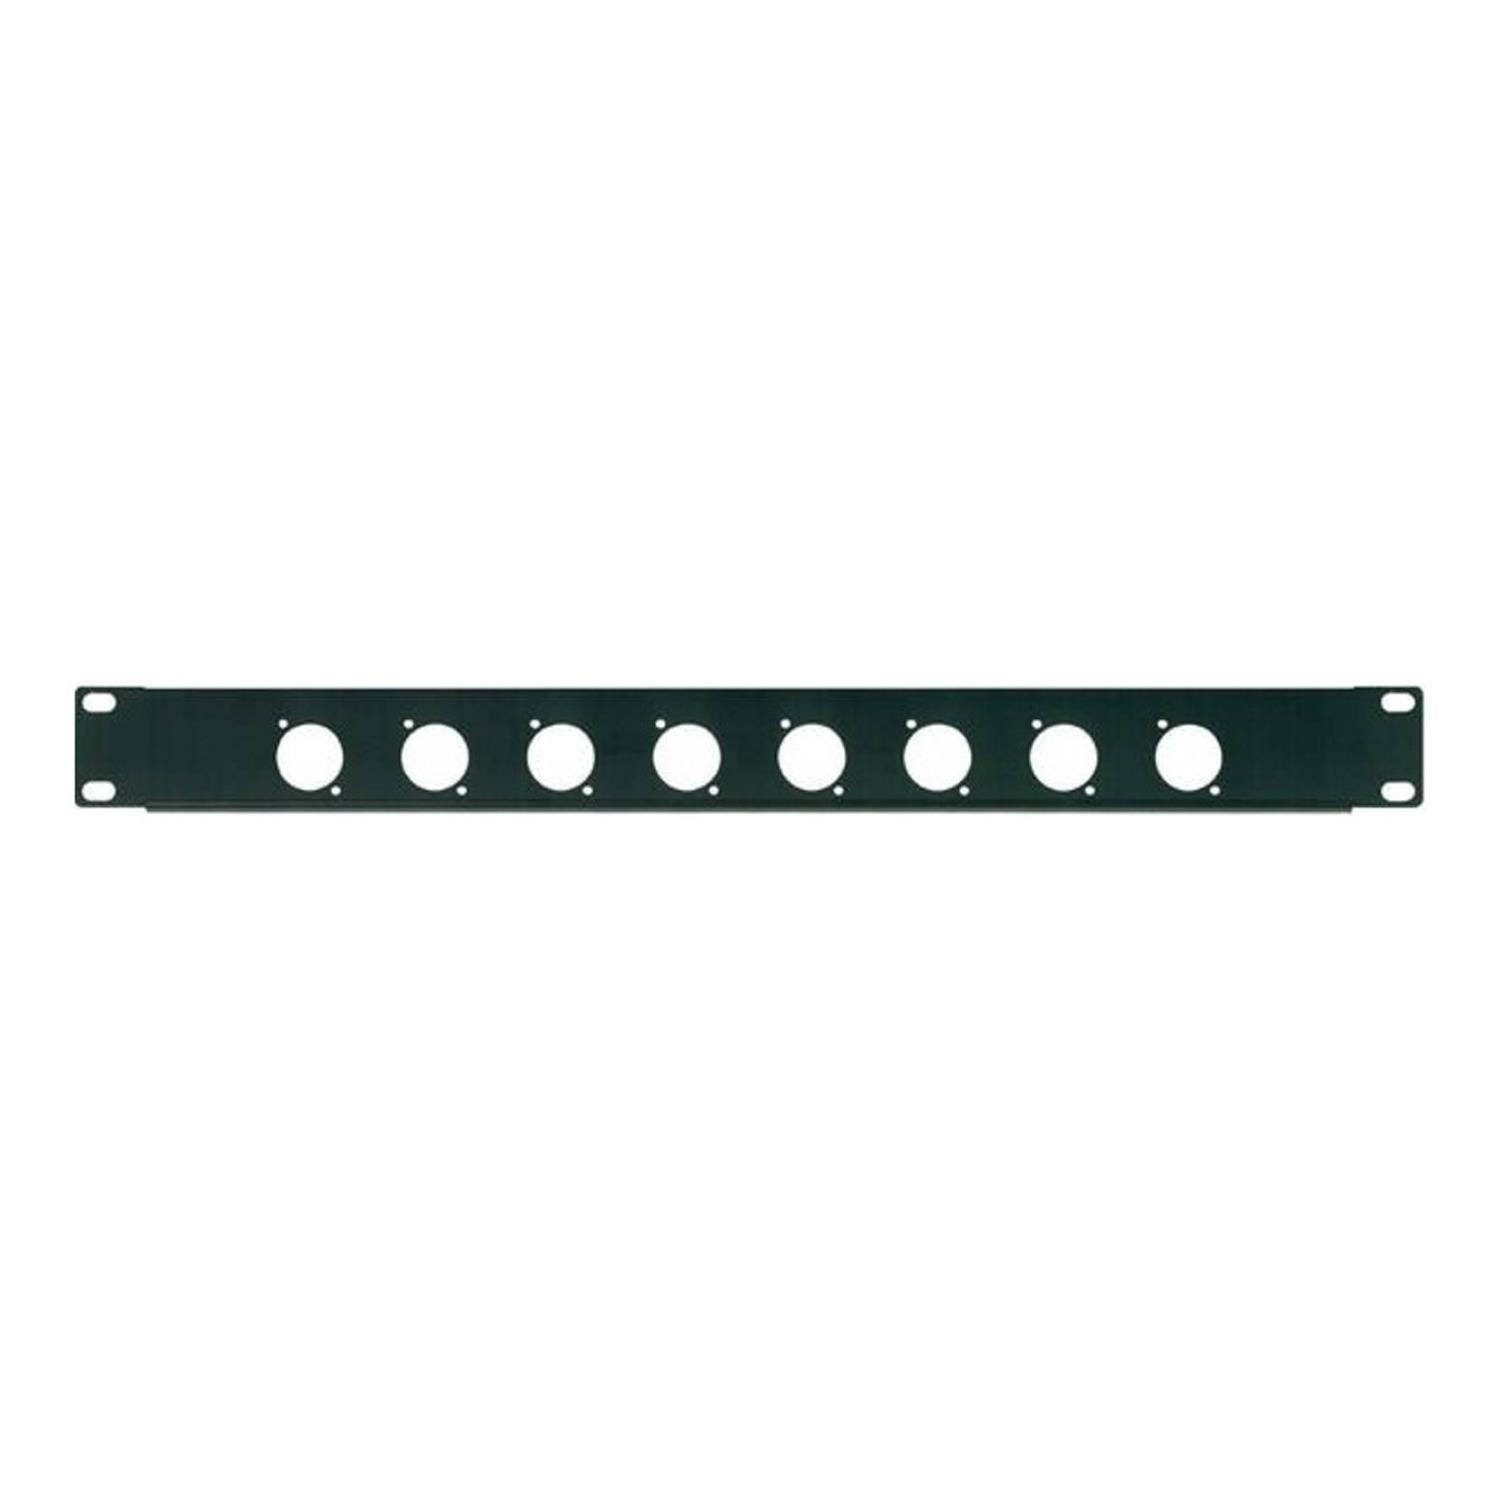 Stagecore 19" 1U 8 Hole Punched Connector Patch Panel for D Series Connectors - DY Pro Audio